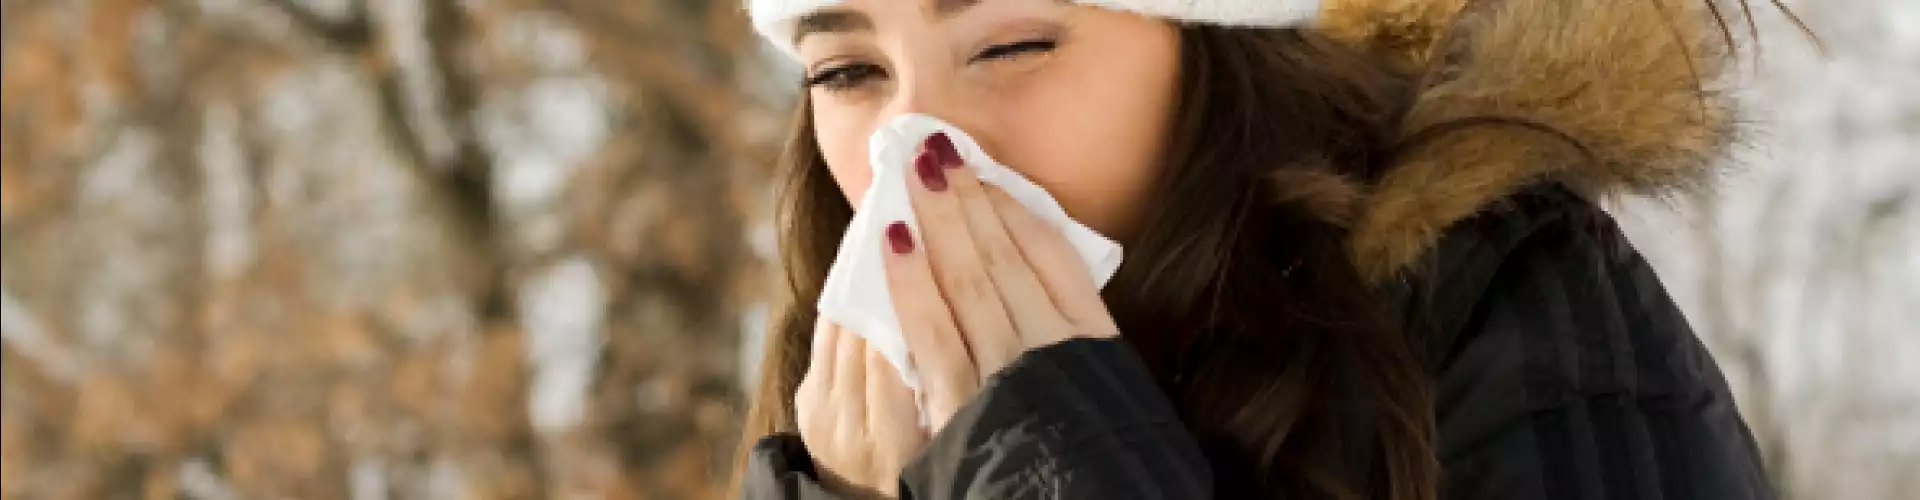 How To Avoid Getting Sick This Winter